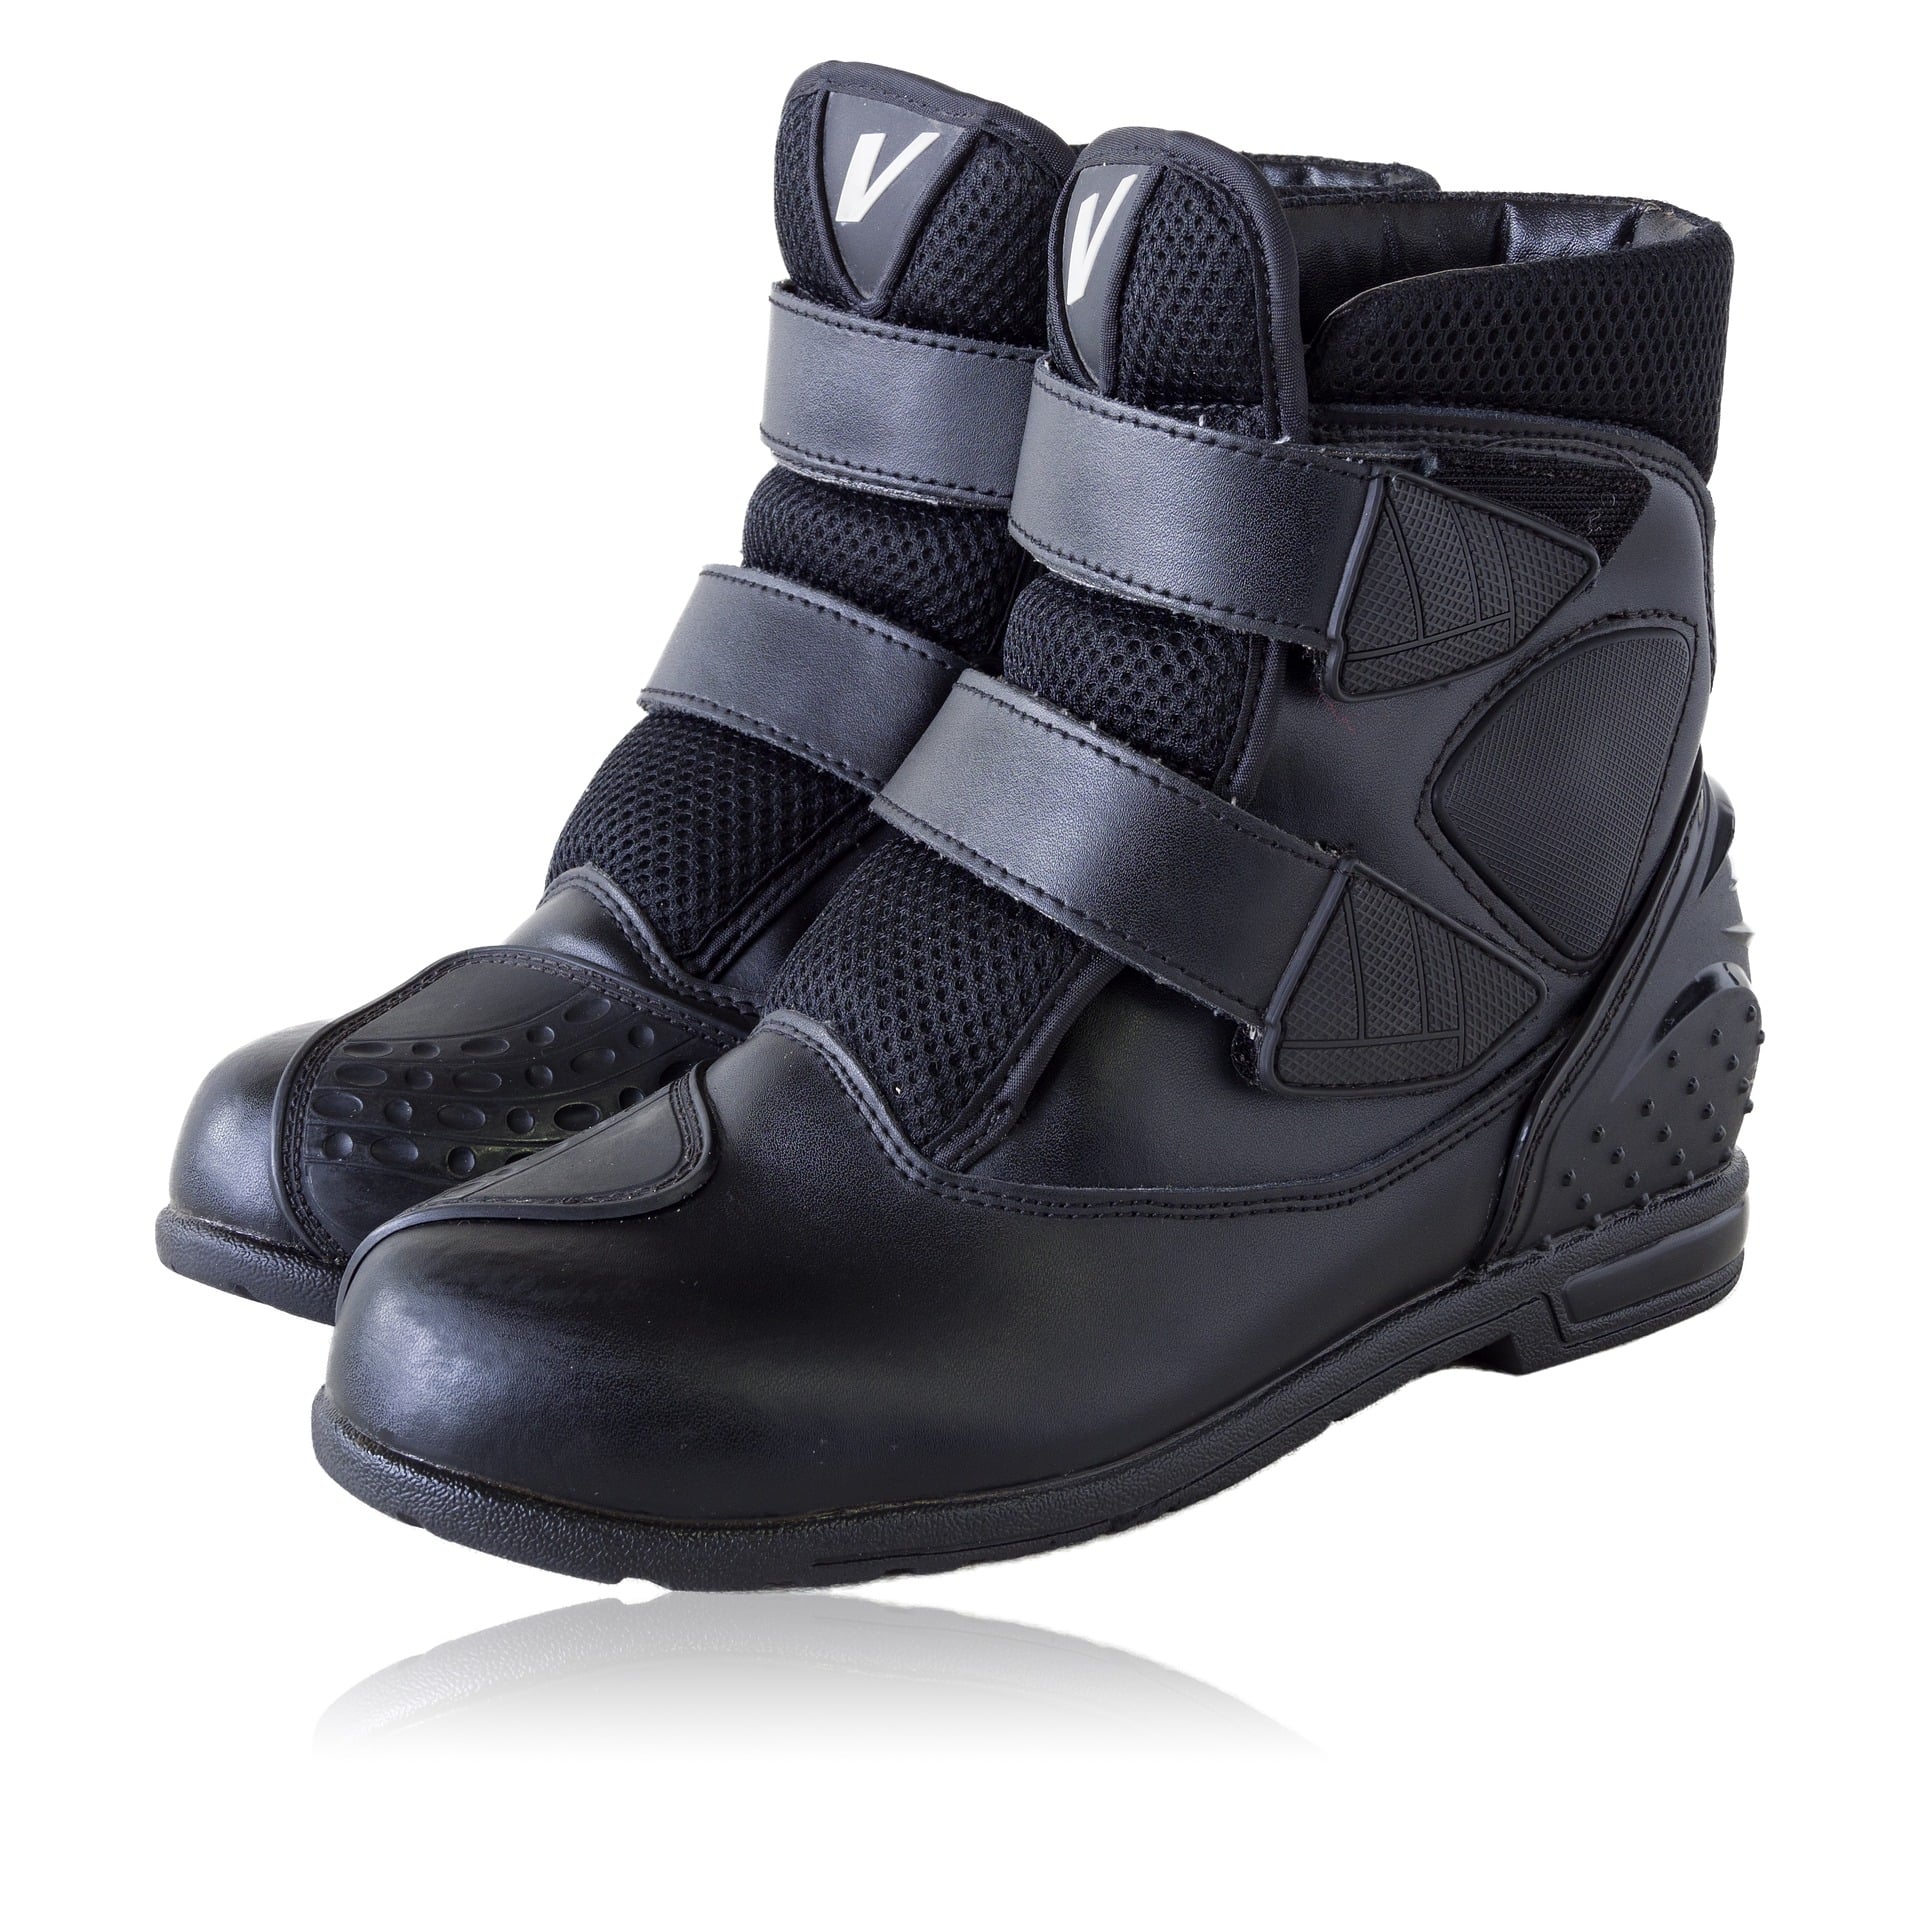 Protège chaussure noir, taille s| Modification Motorcycles